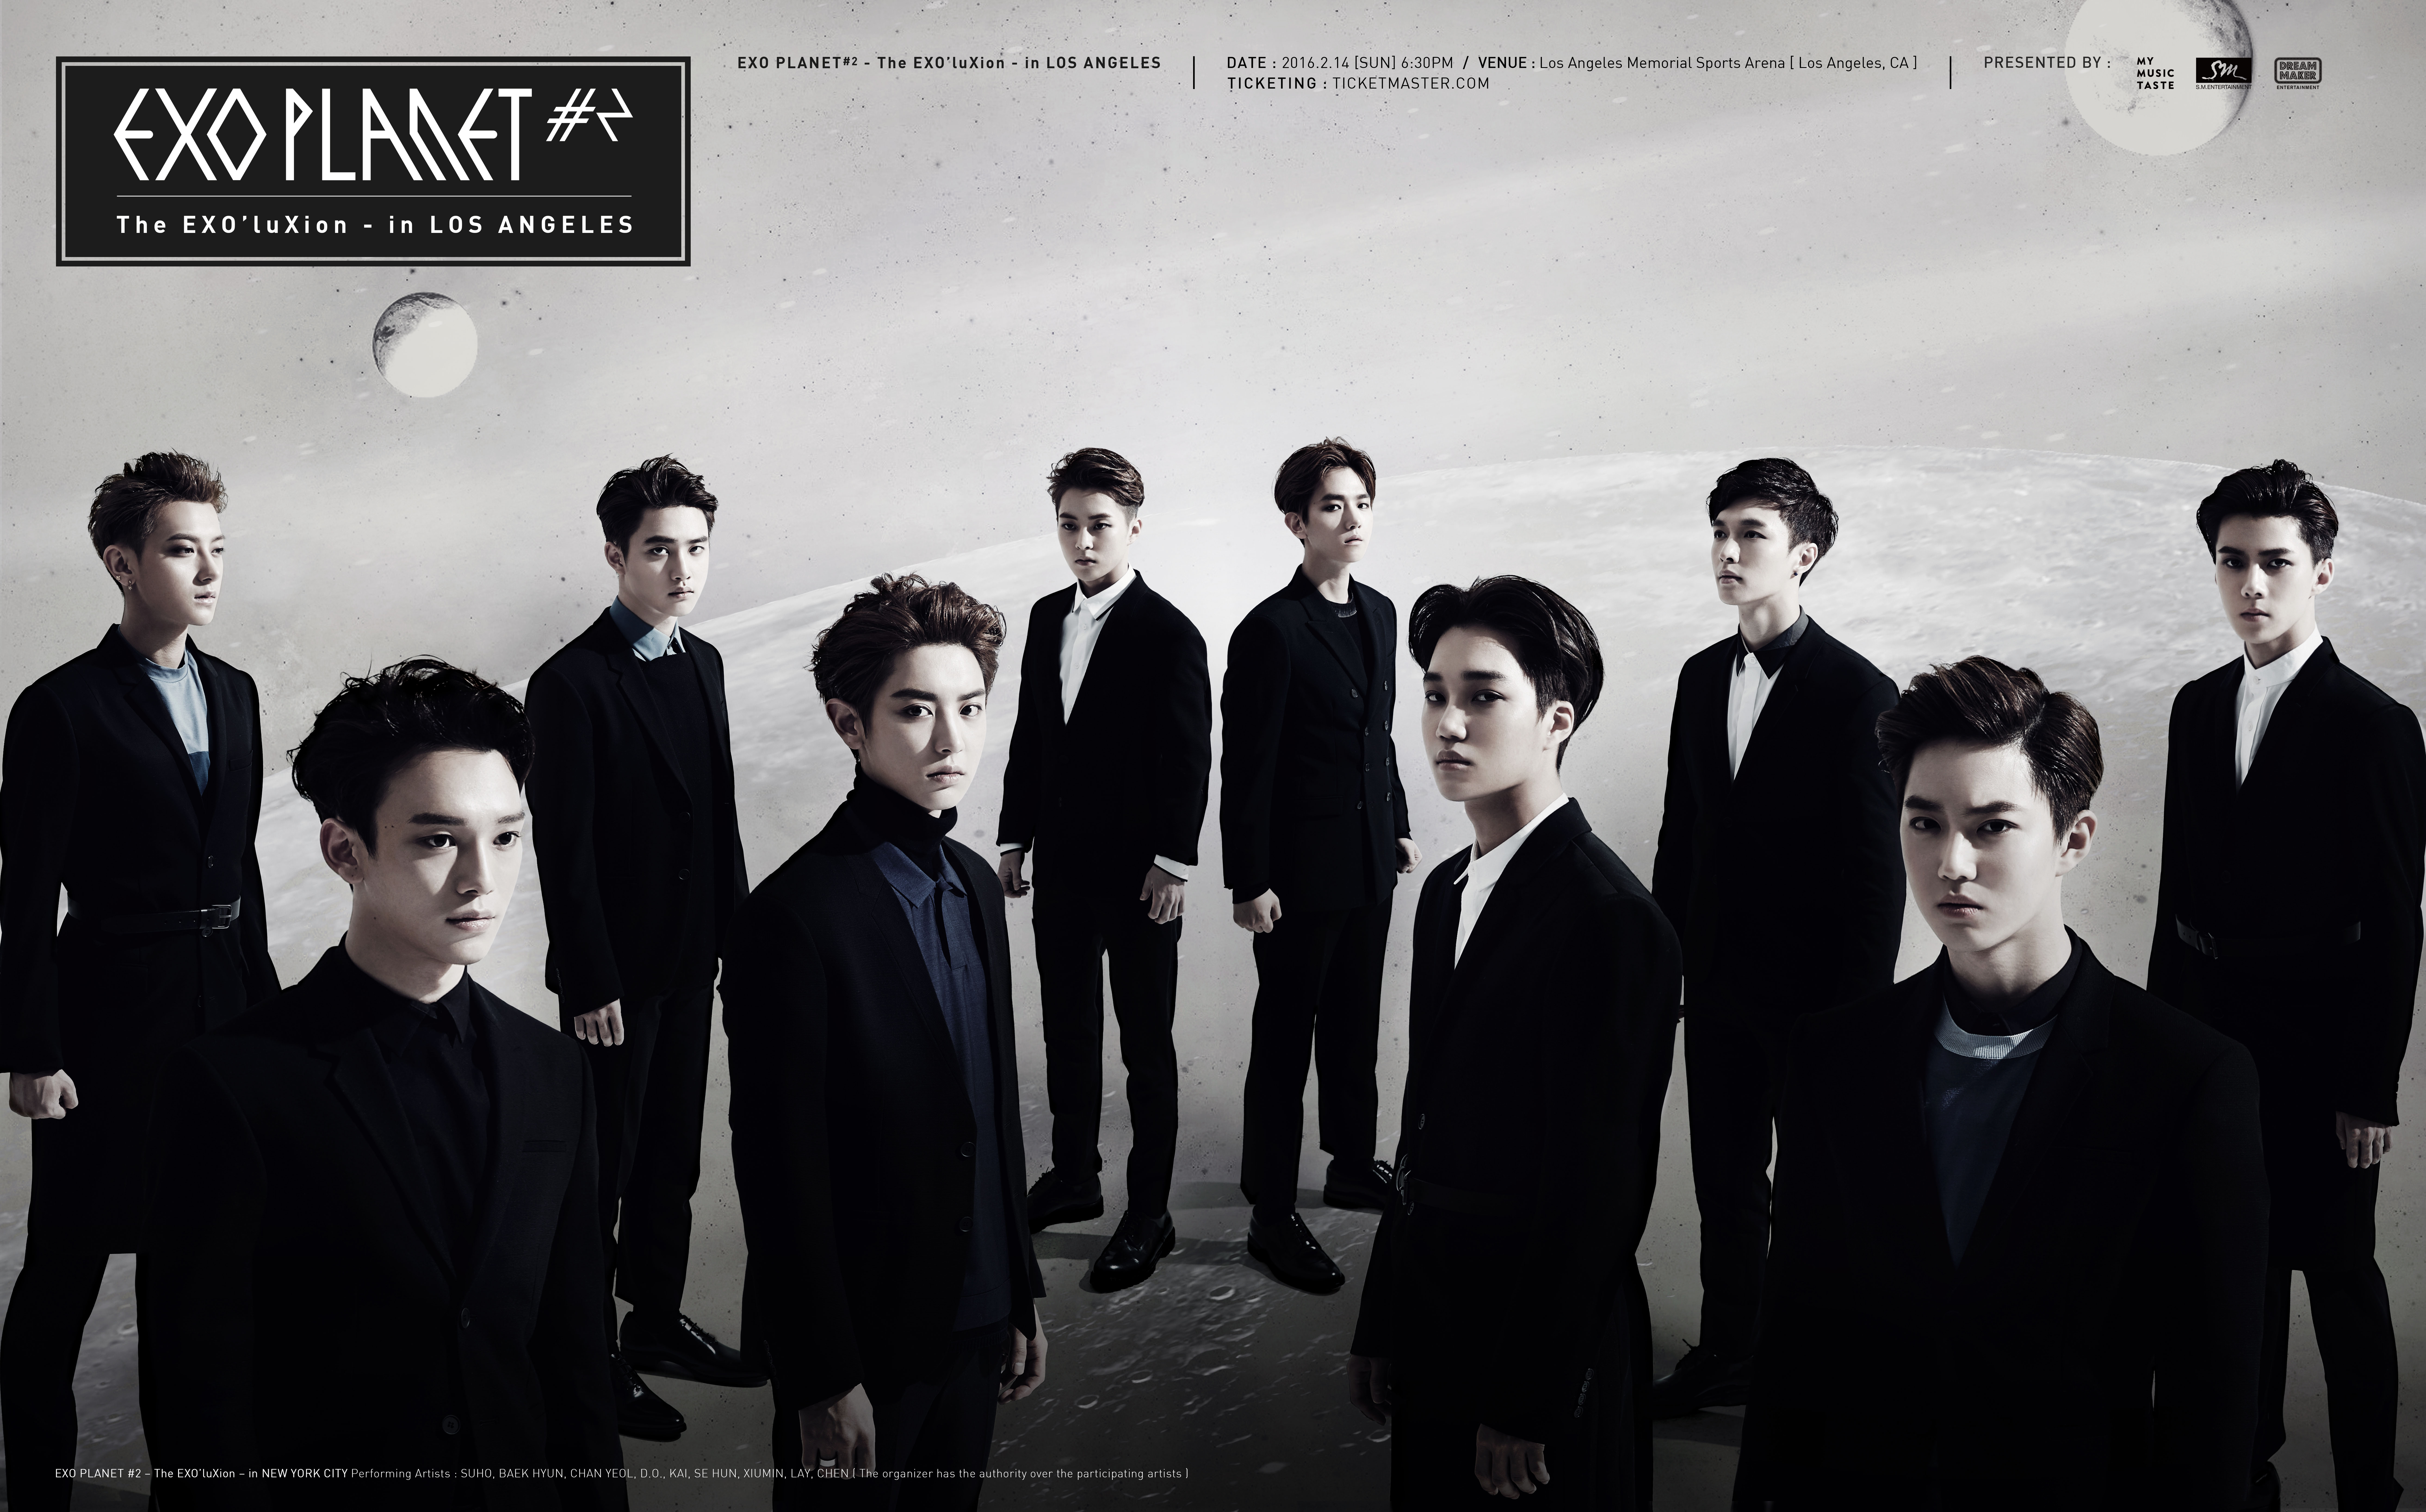 EXO To Hold The EXO’LuXion in North America